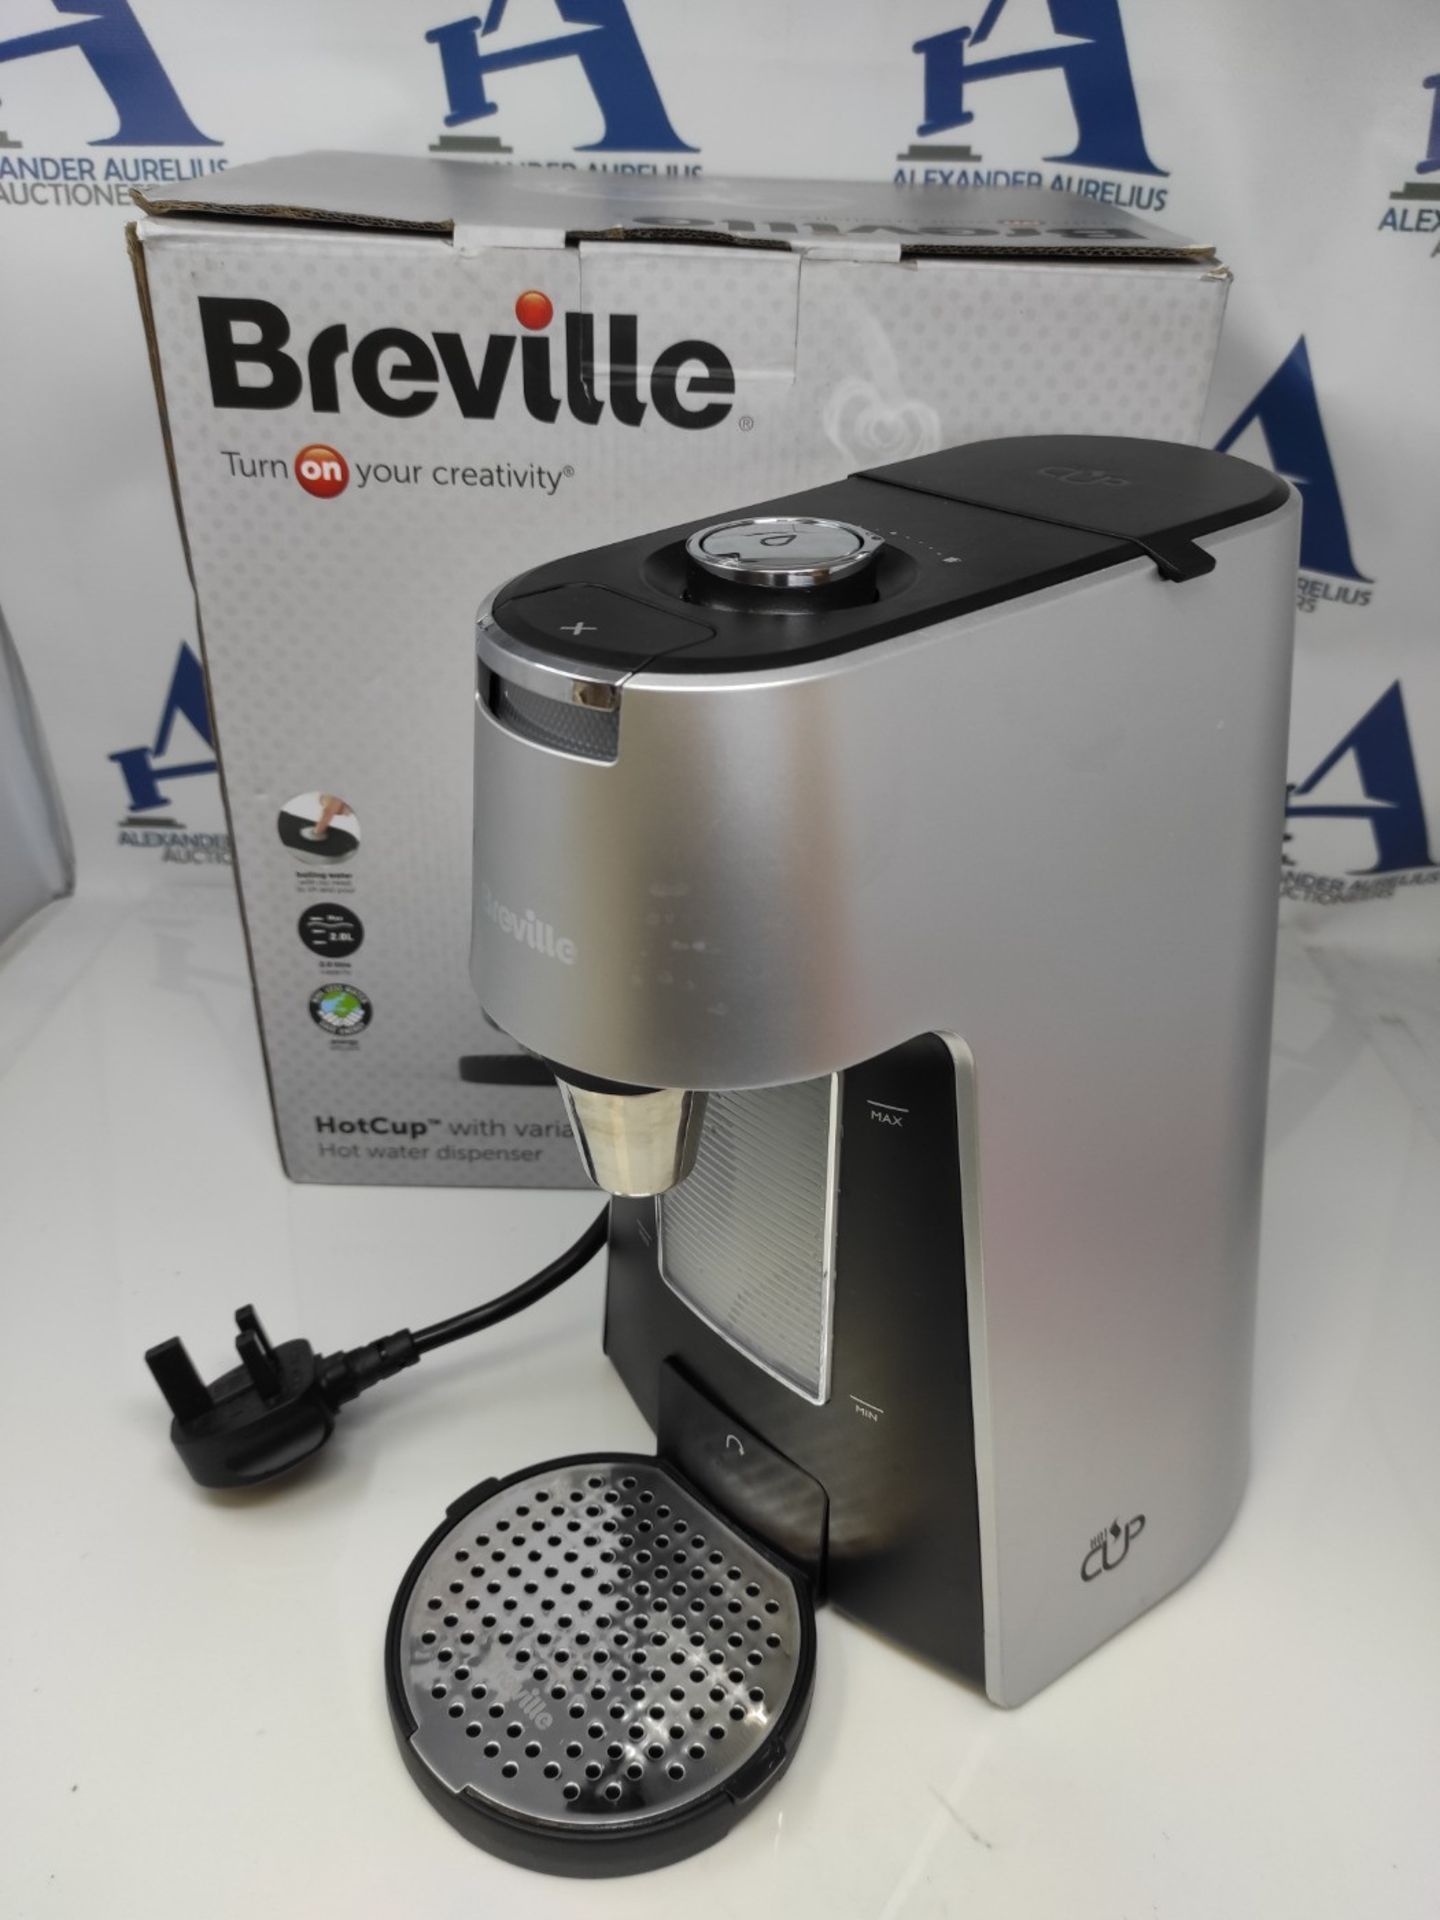 RRP £59.00 Breville HotCup Hot Water Dispenser | 3 kW Fast Boil | Variable Dispense and Height Ad - Bild 2 aus 2